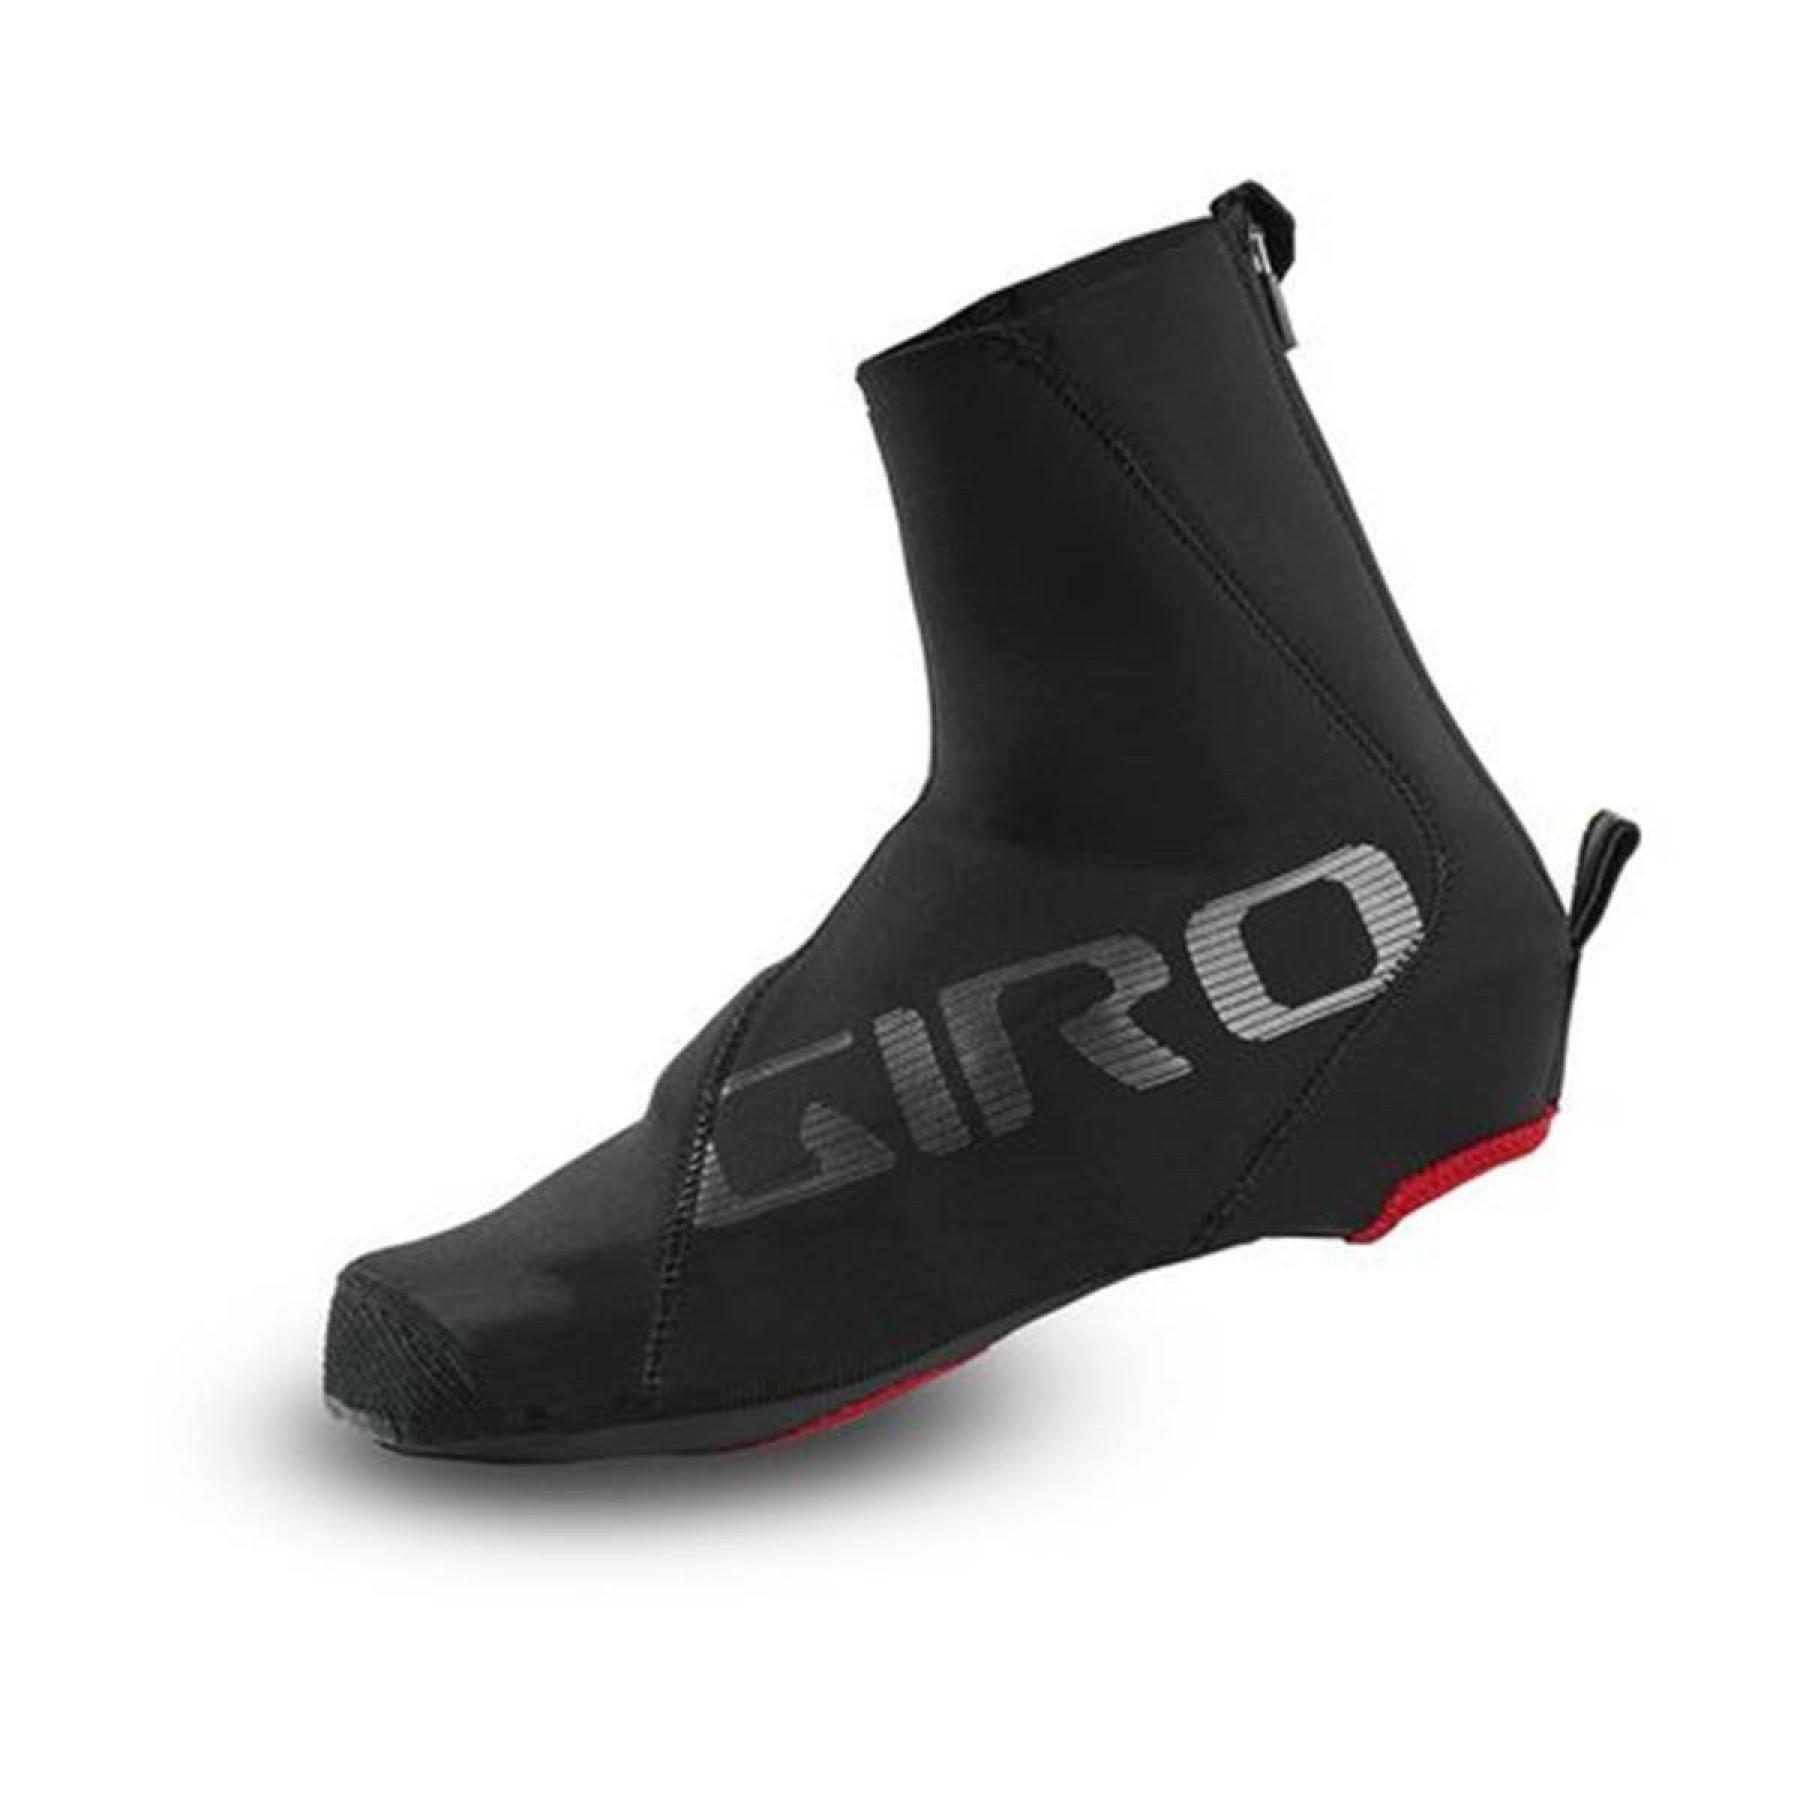 Couvre-chaussures Giro Proof